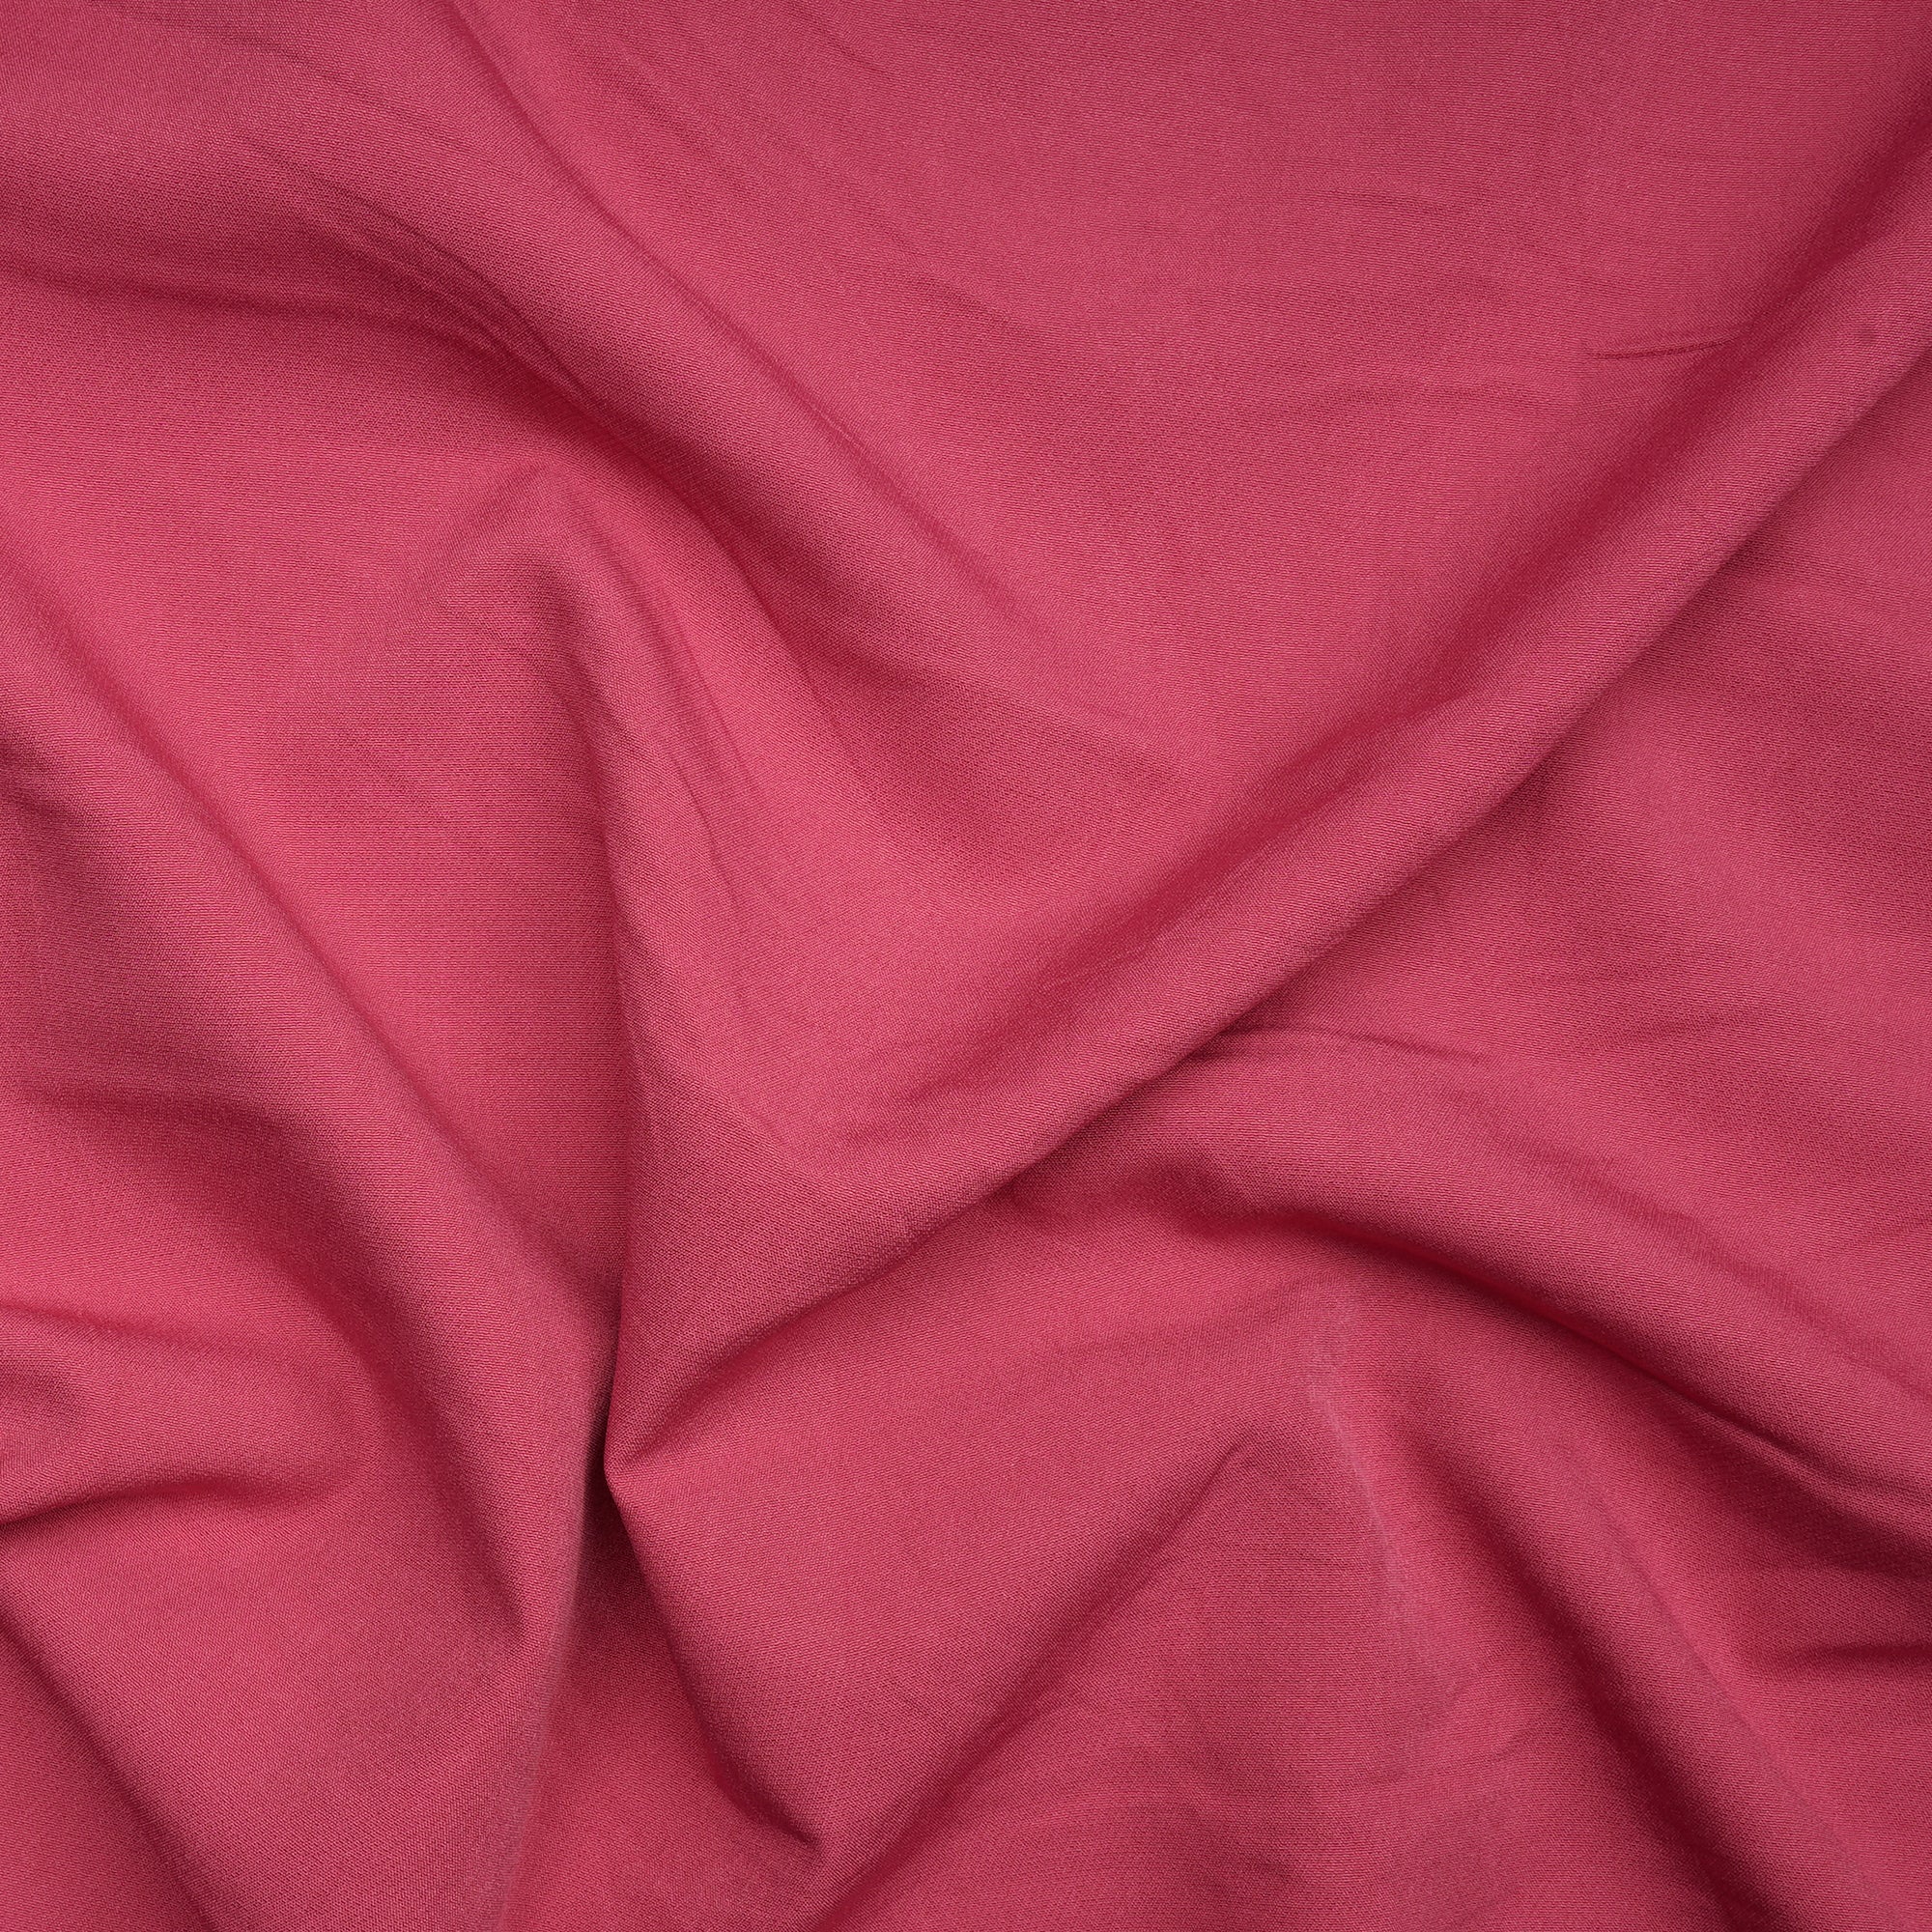 Shocking Pink Solid Dyed Imported Banana Crepe Fabric (60" Width)